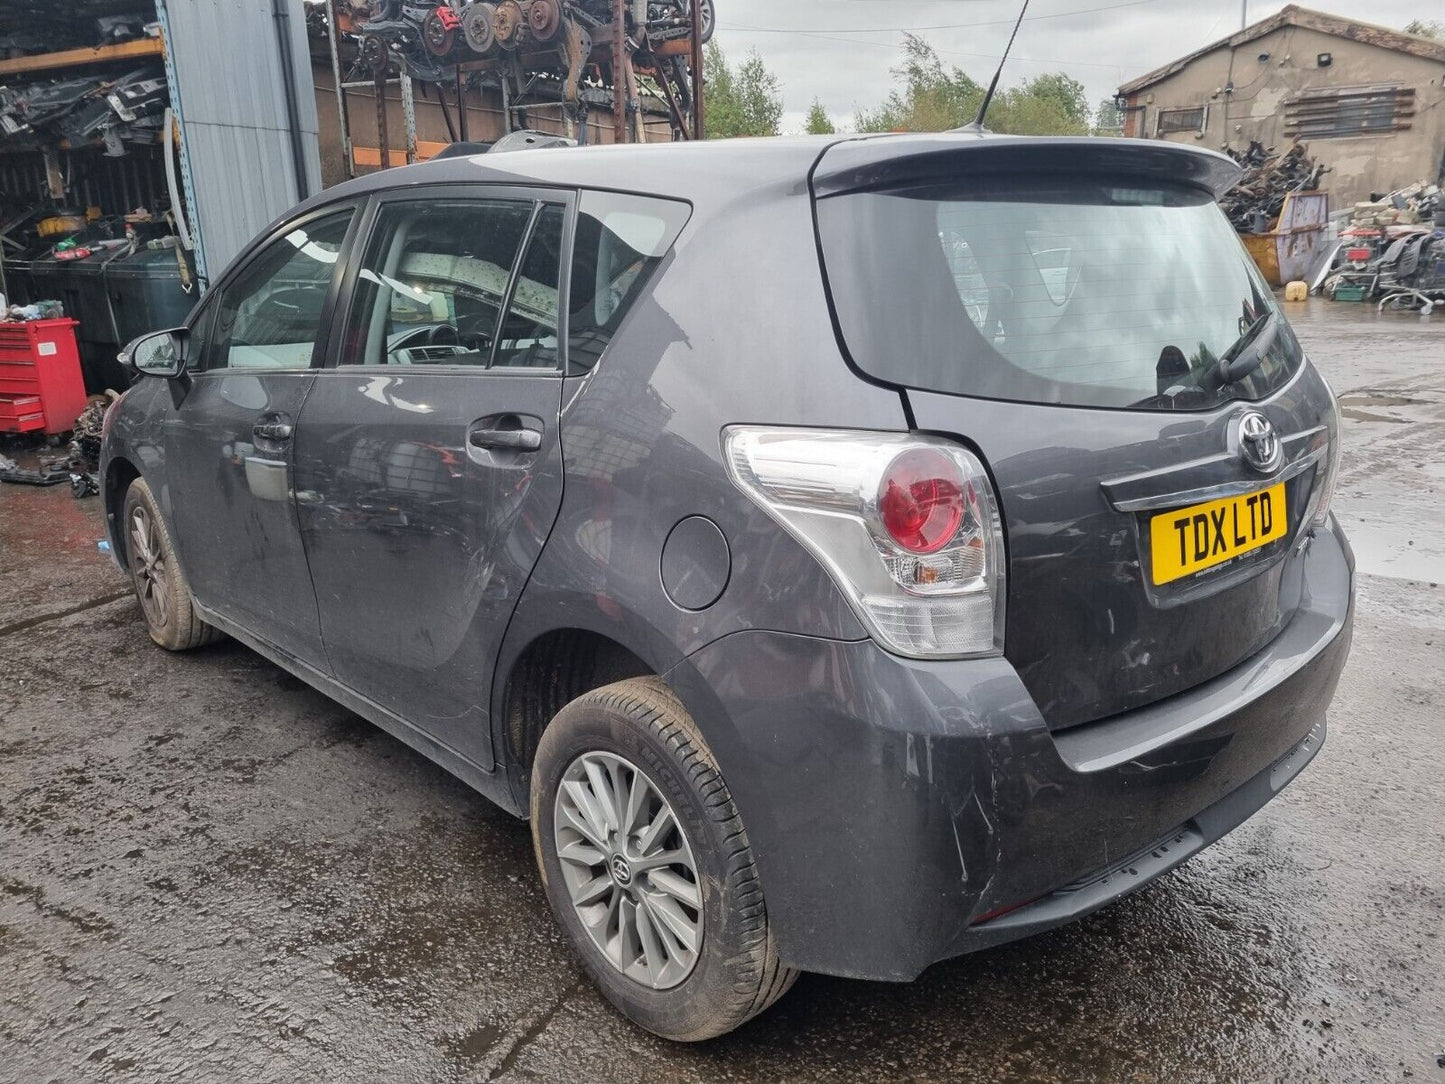 2017 TOYOTA VERSO (AR20) ICON MK2 1.6 PETROL 6 SPEED MANUAL VEHICLE PARTS SPARES